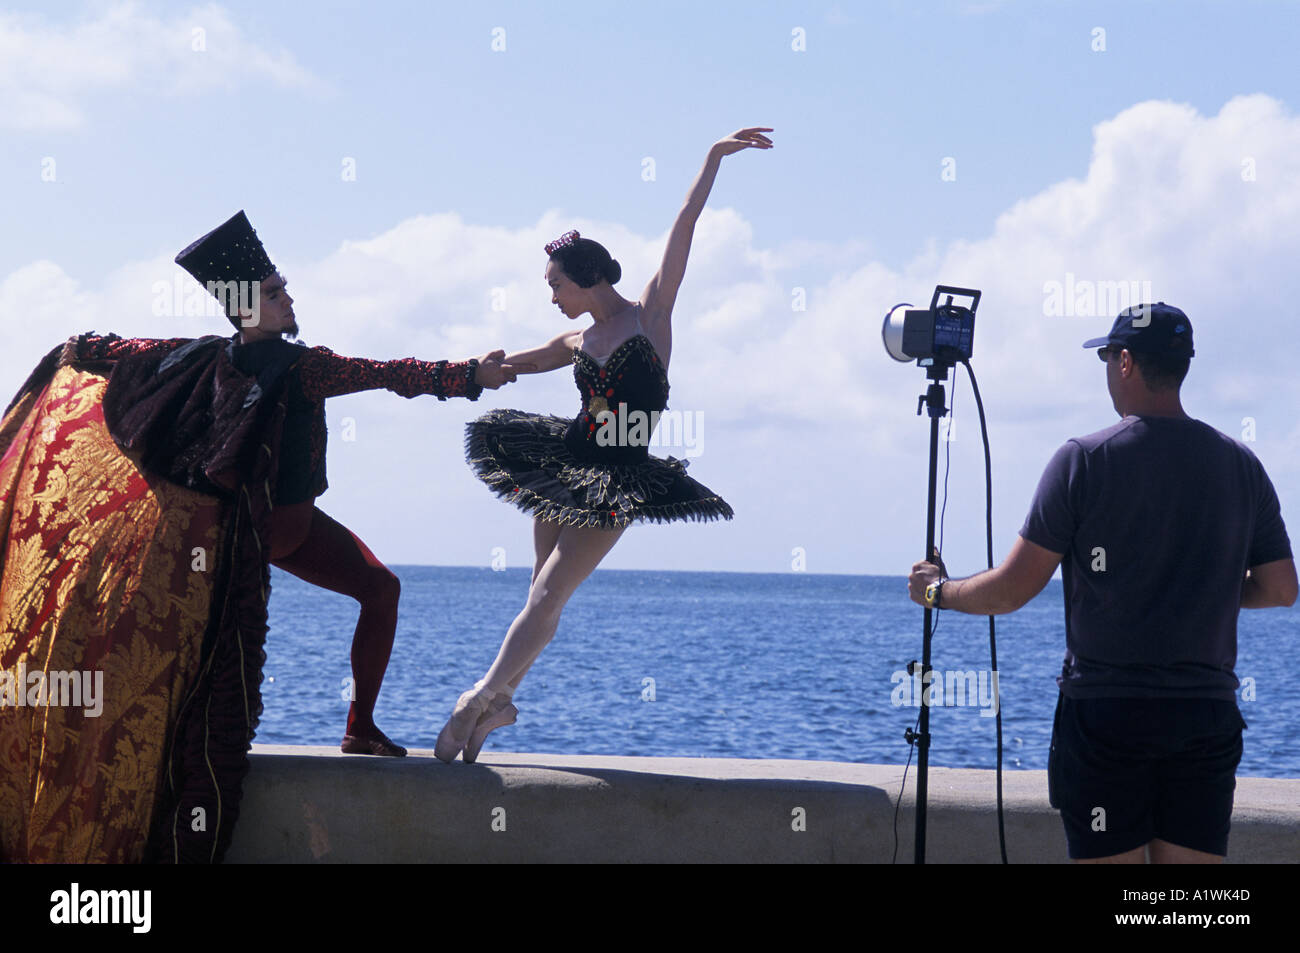 Malecon.BALLET DANCER S WEARING THEATRICAL  COSTUMES POSE HOLDING ONTO EACH OTHERS ARMS FOR A PHOTO SHOOT IN FRONT OF THE SEA Stock Photo